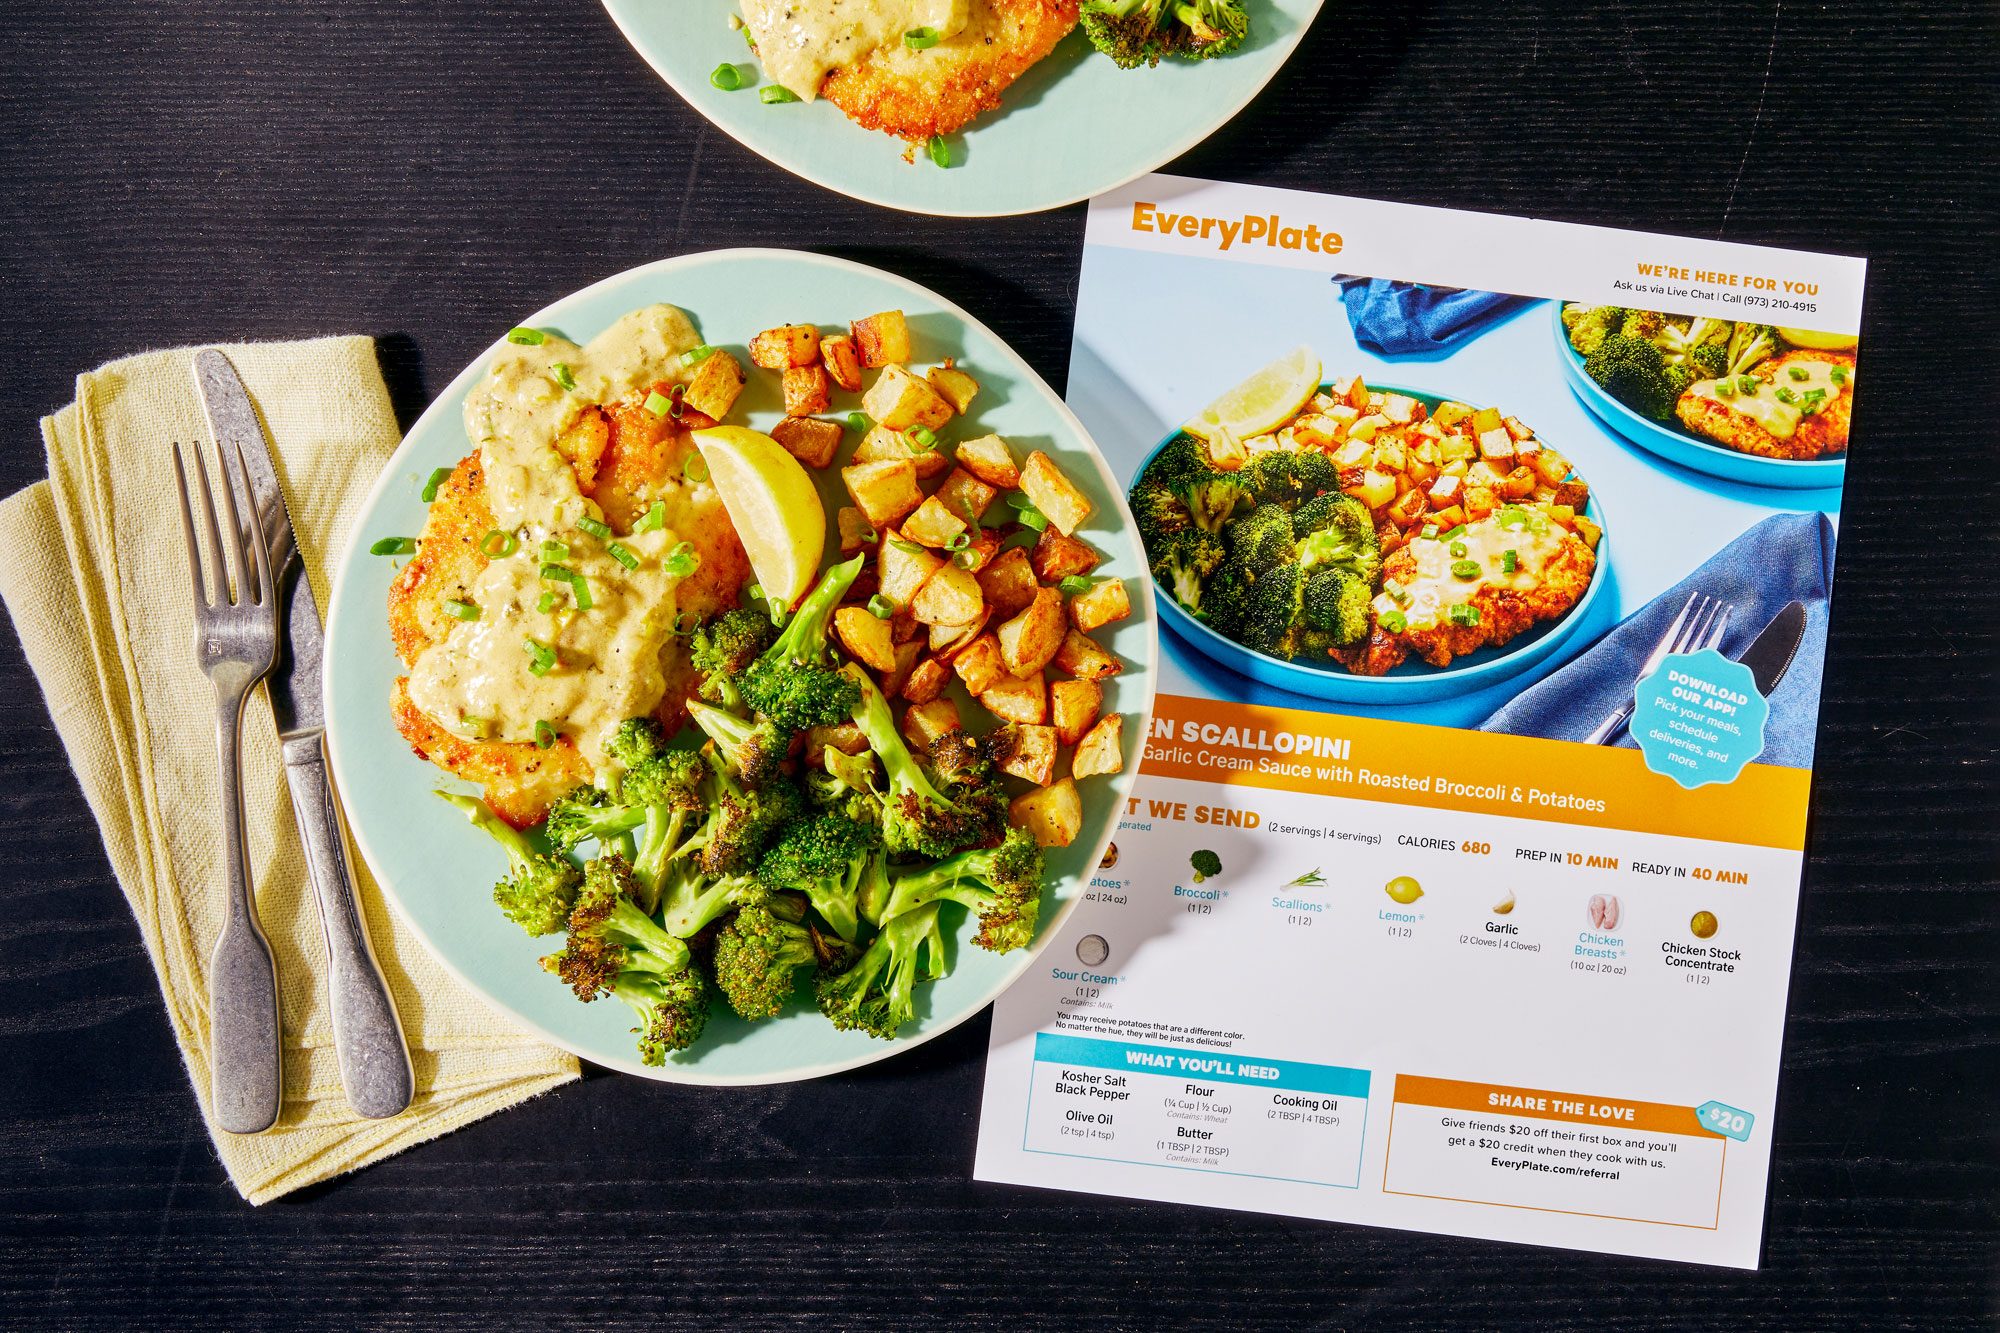 Everyplate Meal Kit tested